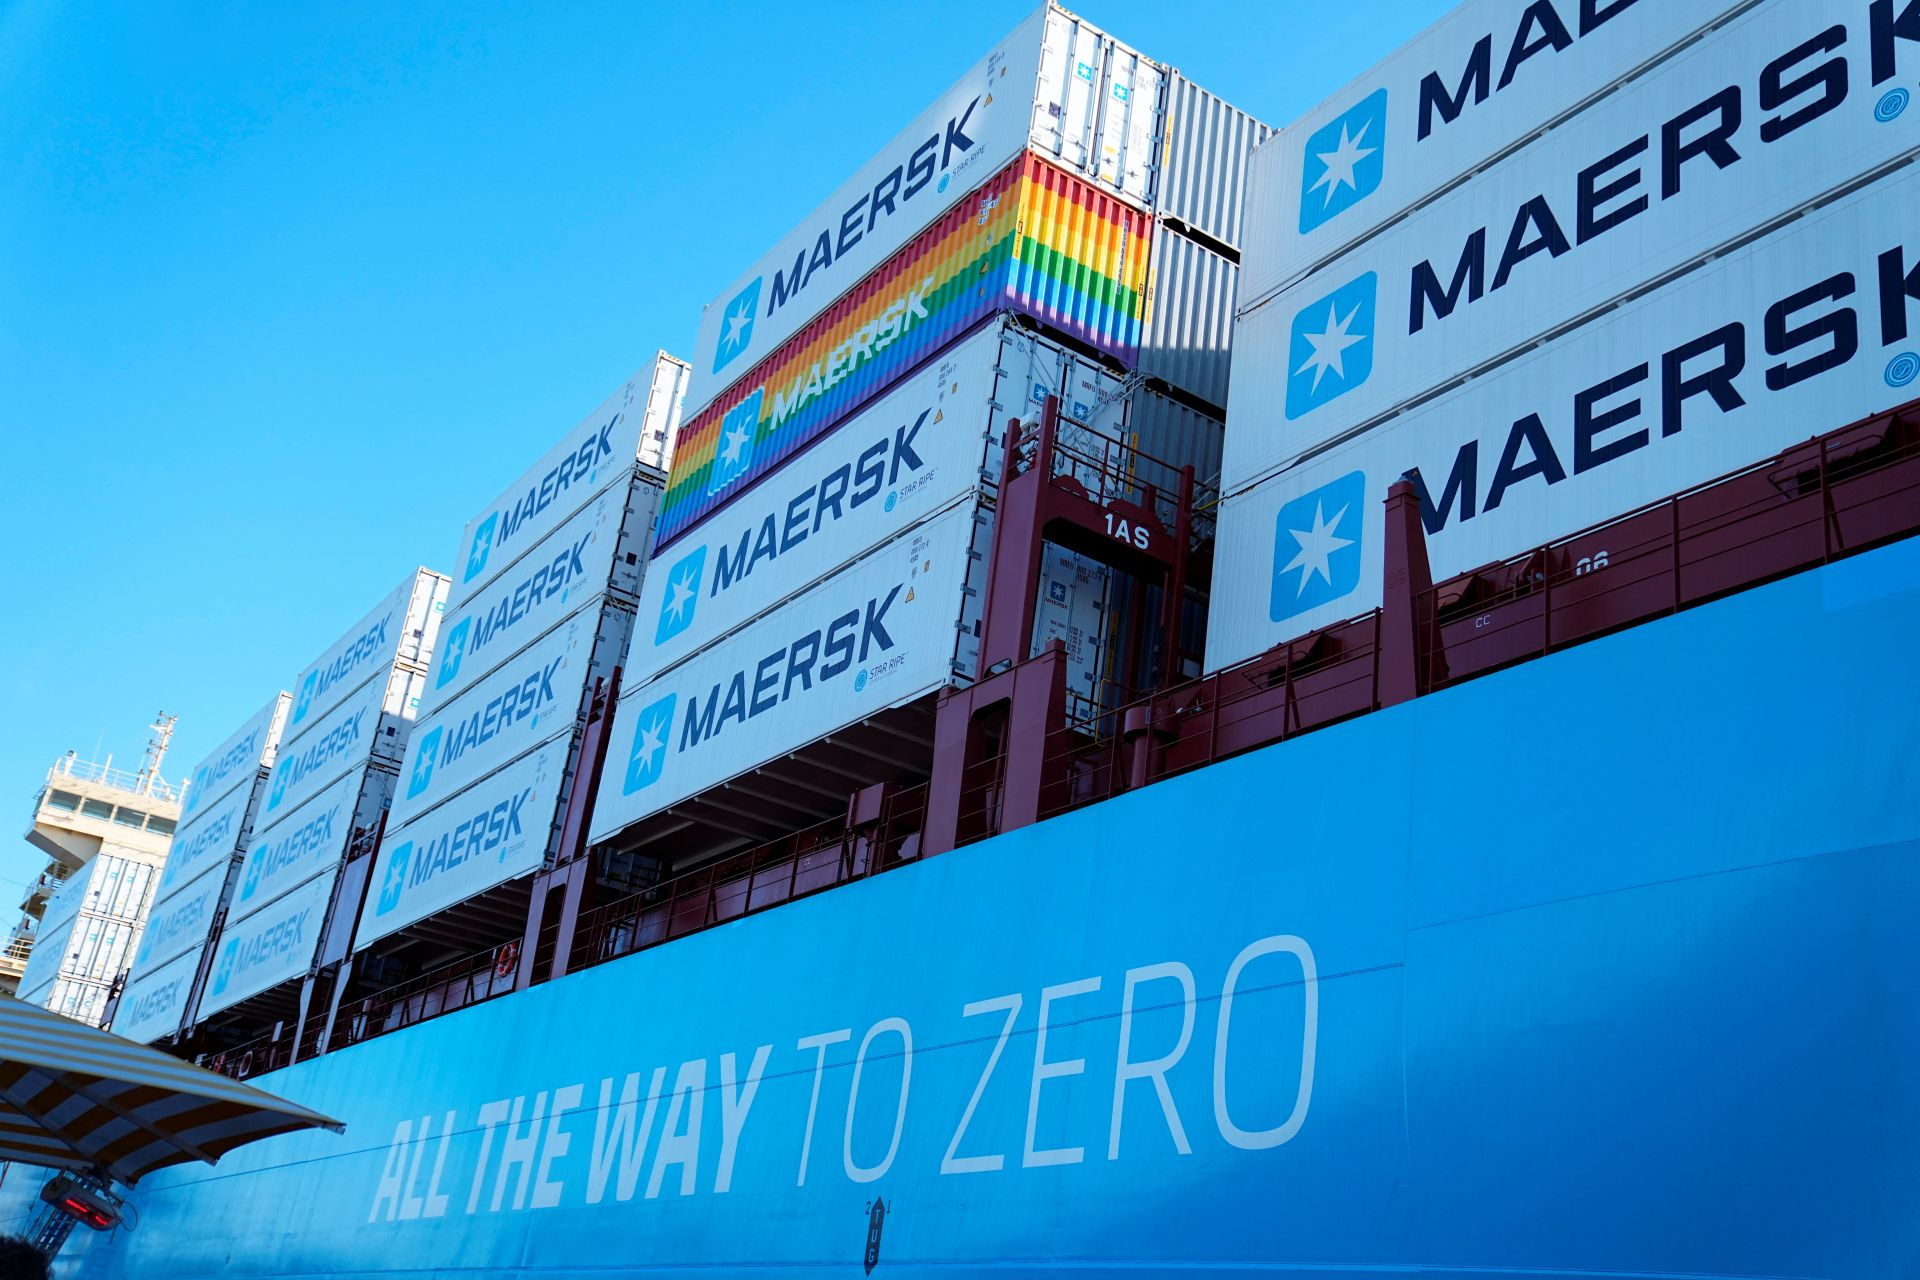 Maersk deploys 125,000 extra containers and herald’s crisis surcharge